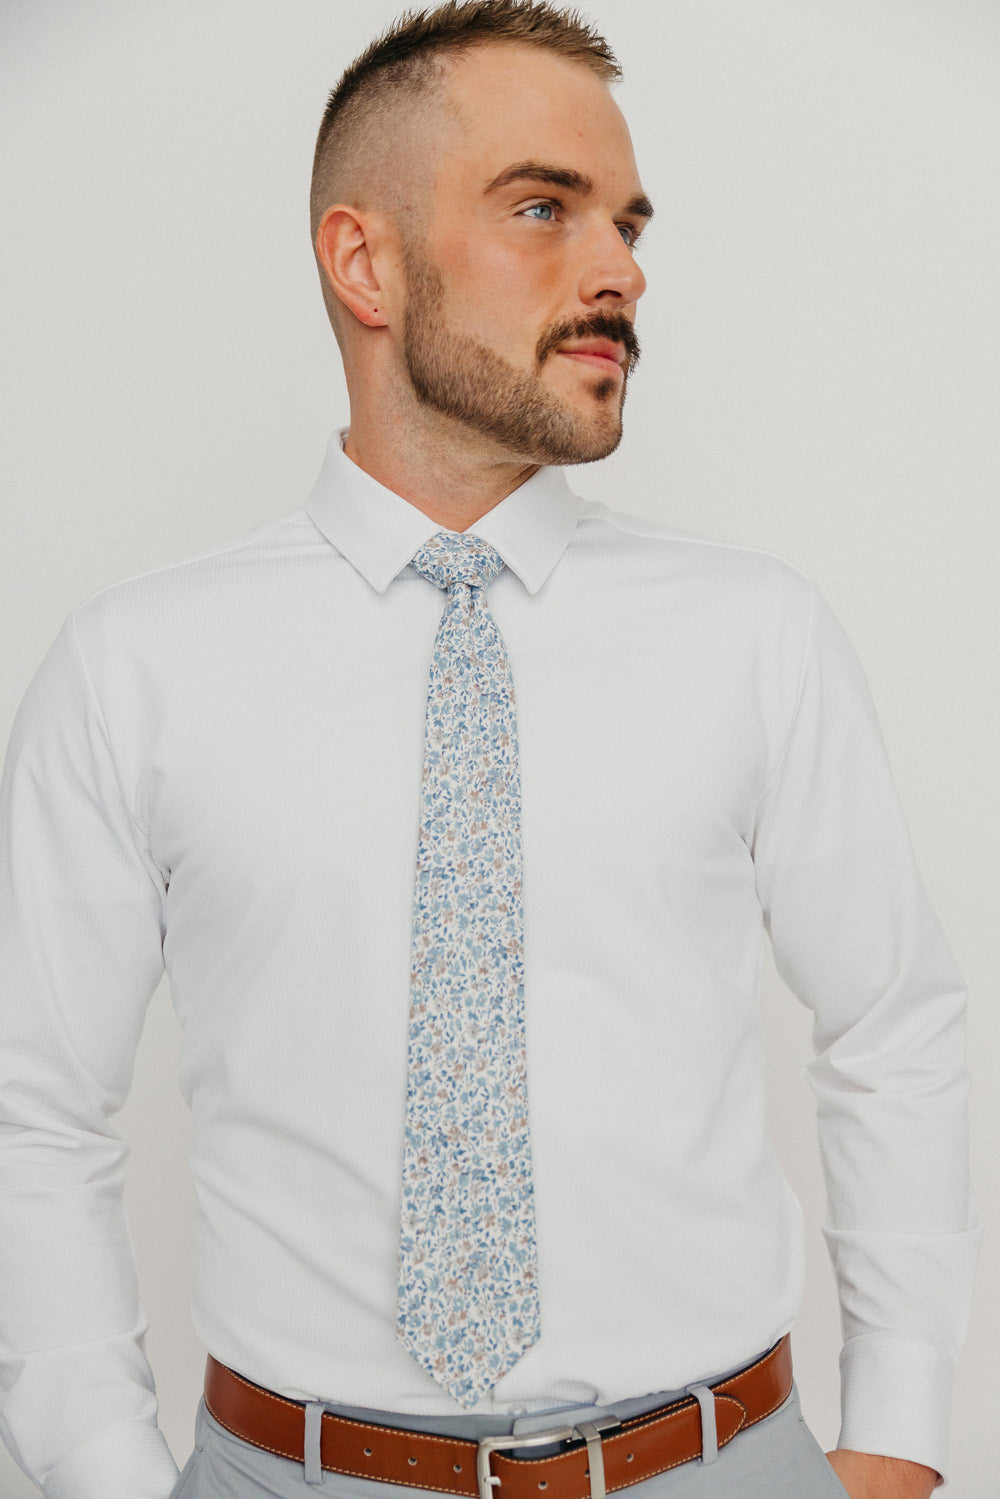 Scorpion Grass tie worn with a white shirt, brown belt and gray pants.